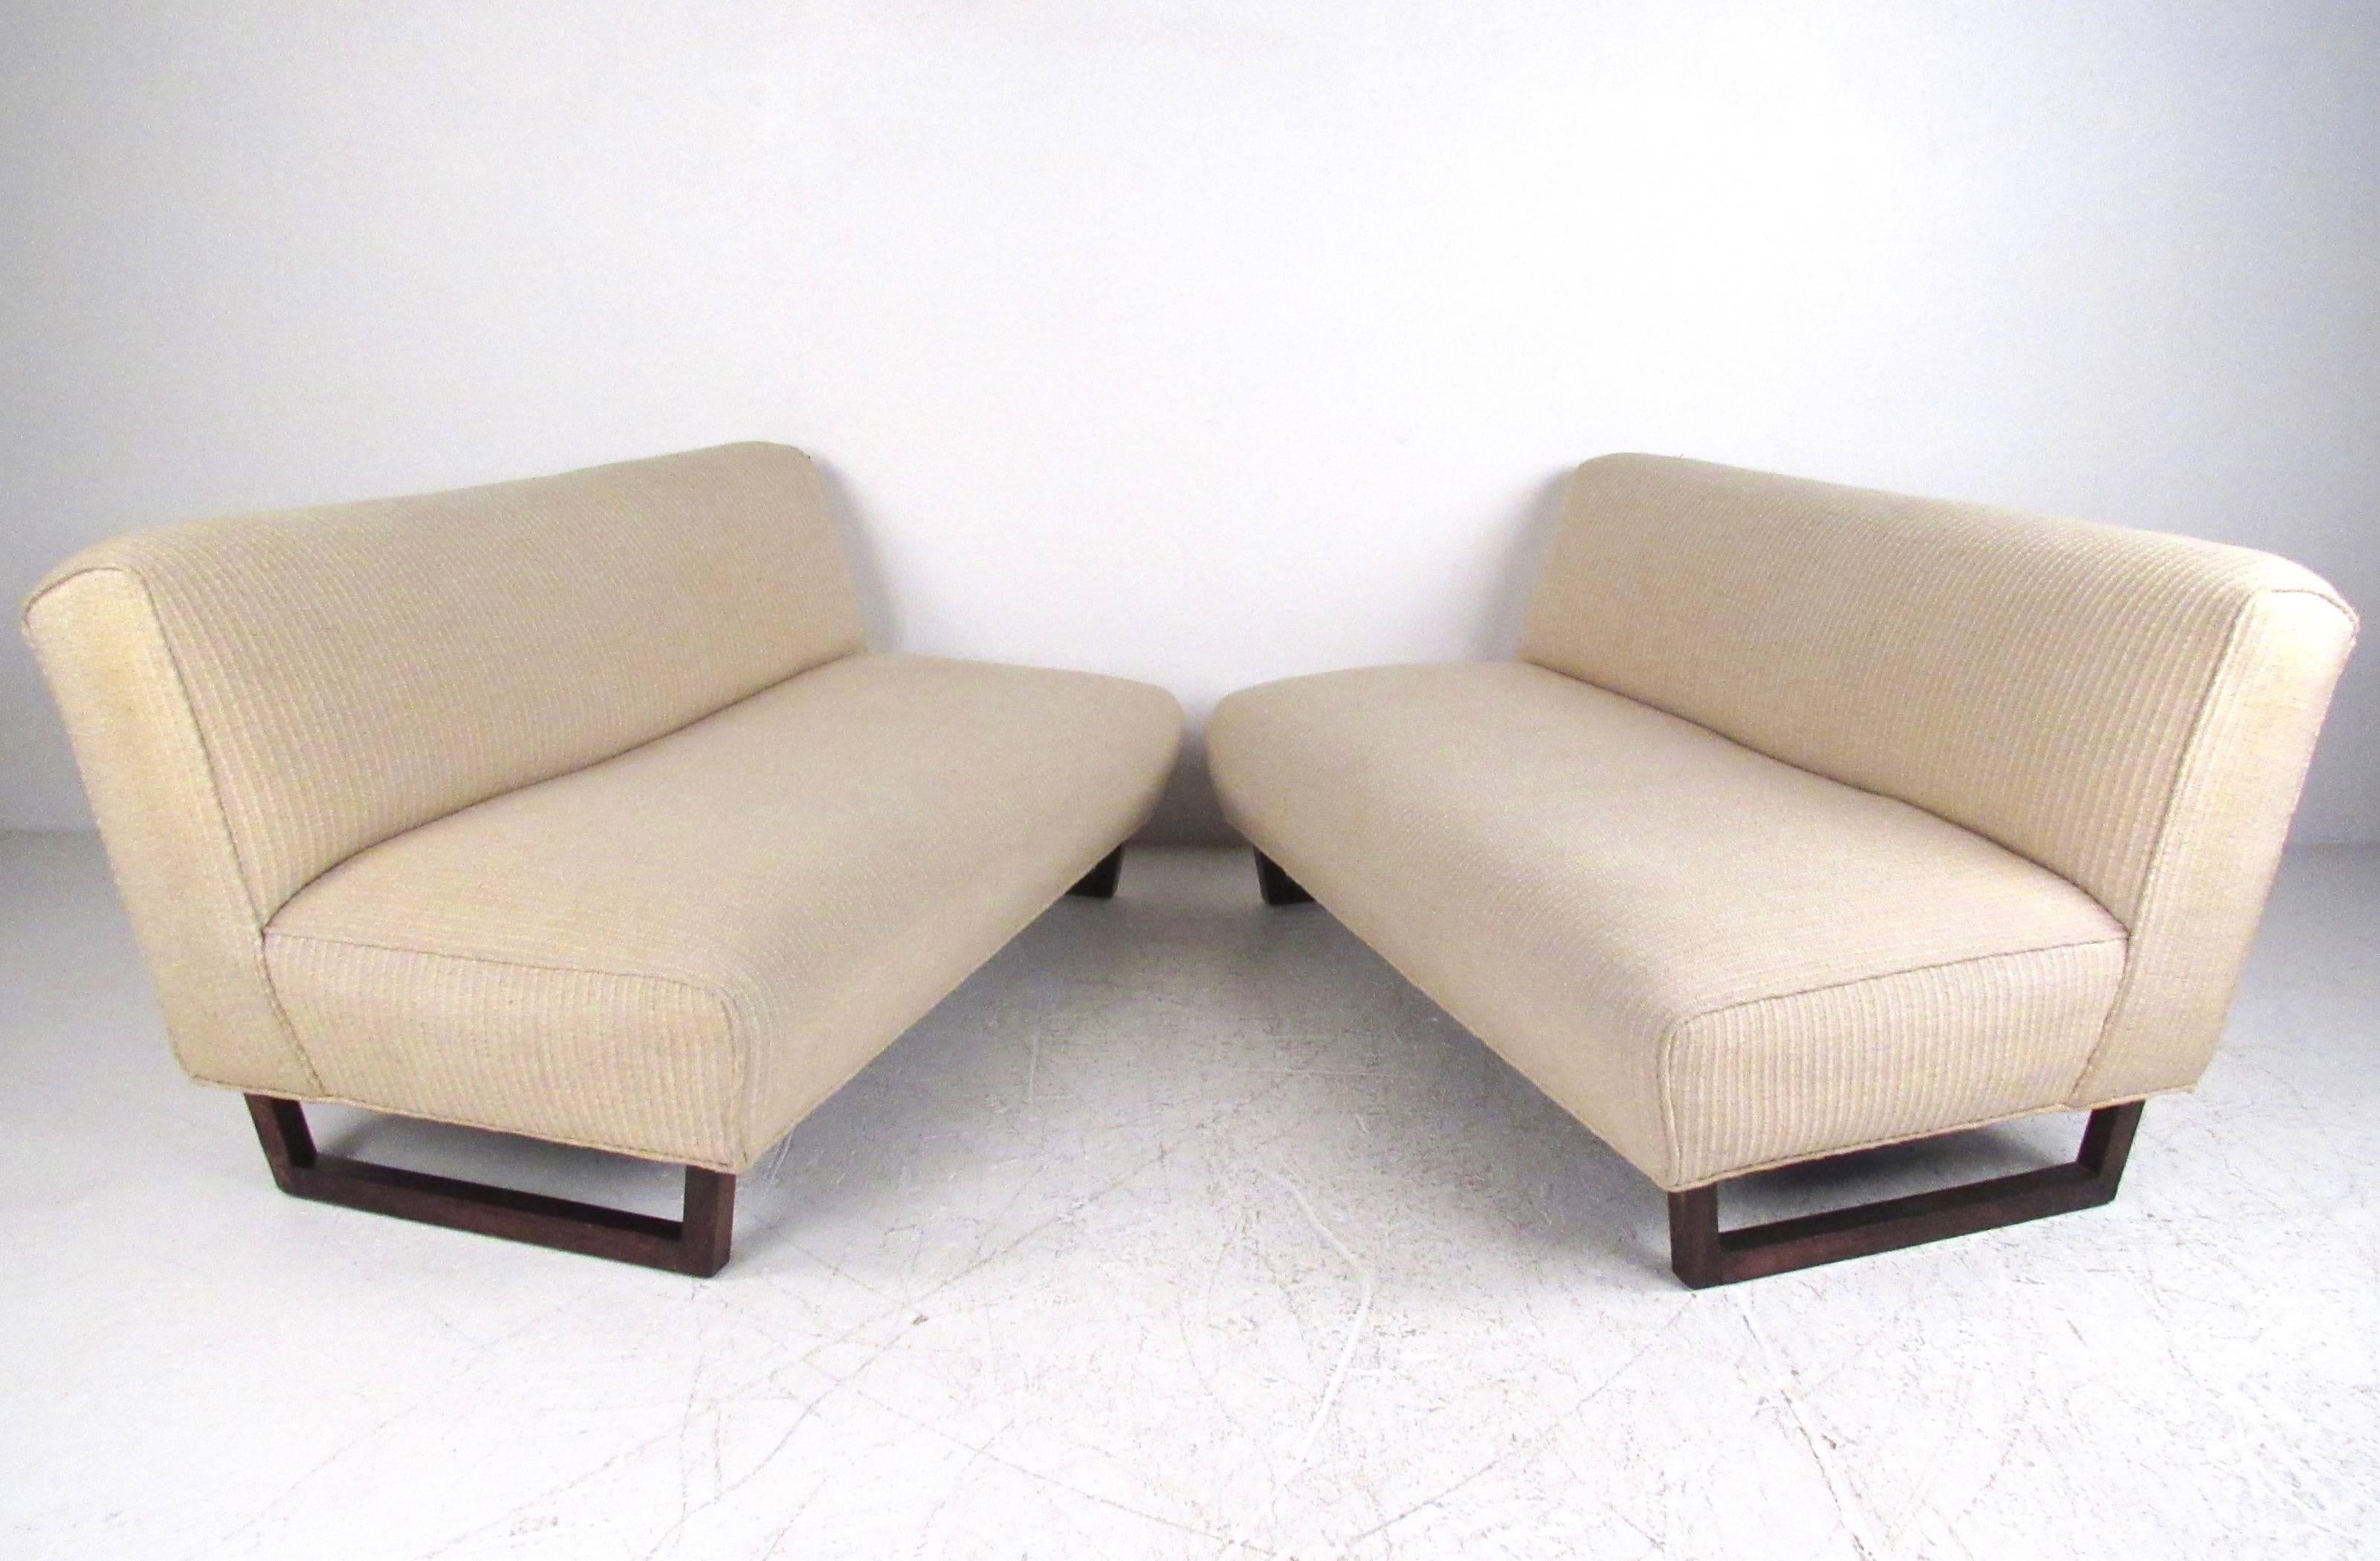 This vintage pair of armless sofas feature unique rosewood sled legs with stripped vintage fabric. Comfortable low seating for any interior, these low profile settees make a stylish seating addition to home or business. Please confirm item location